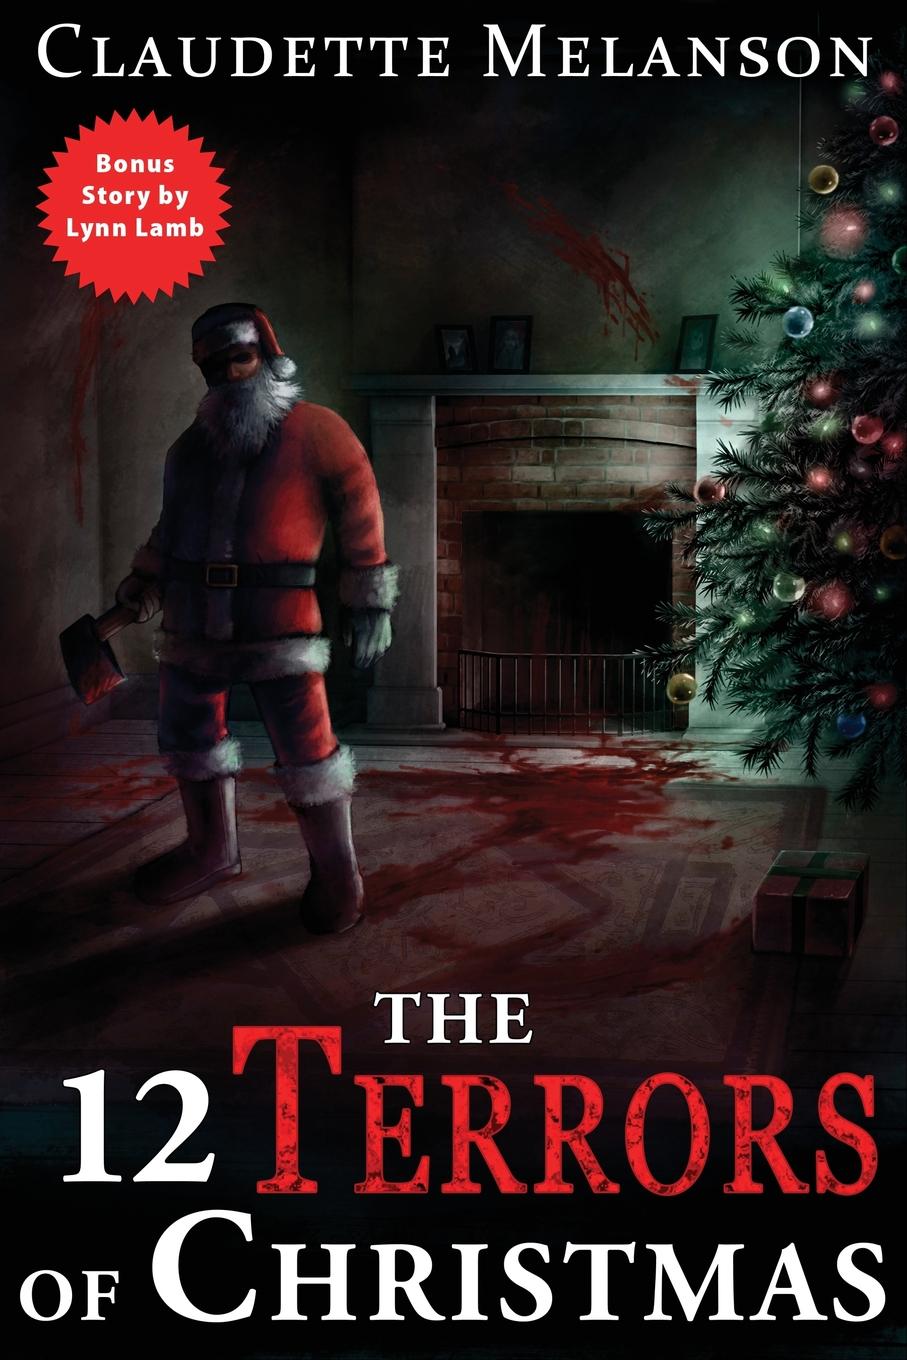 The 12 Terrors of Christmas: A Christmas Horror Anthology